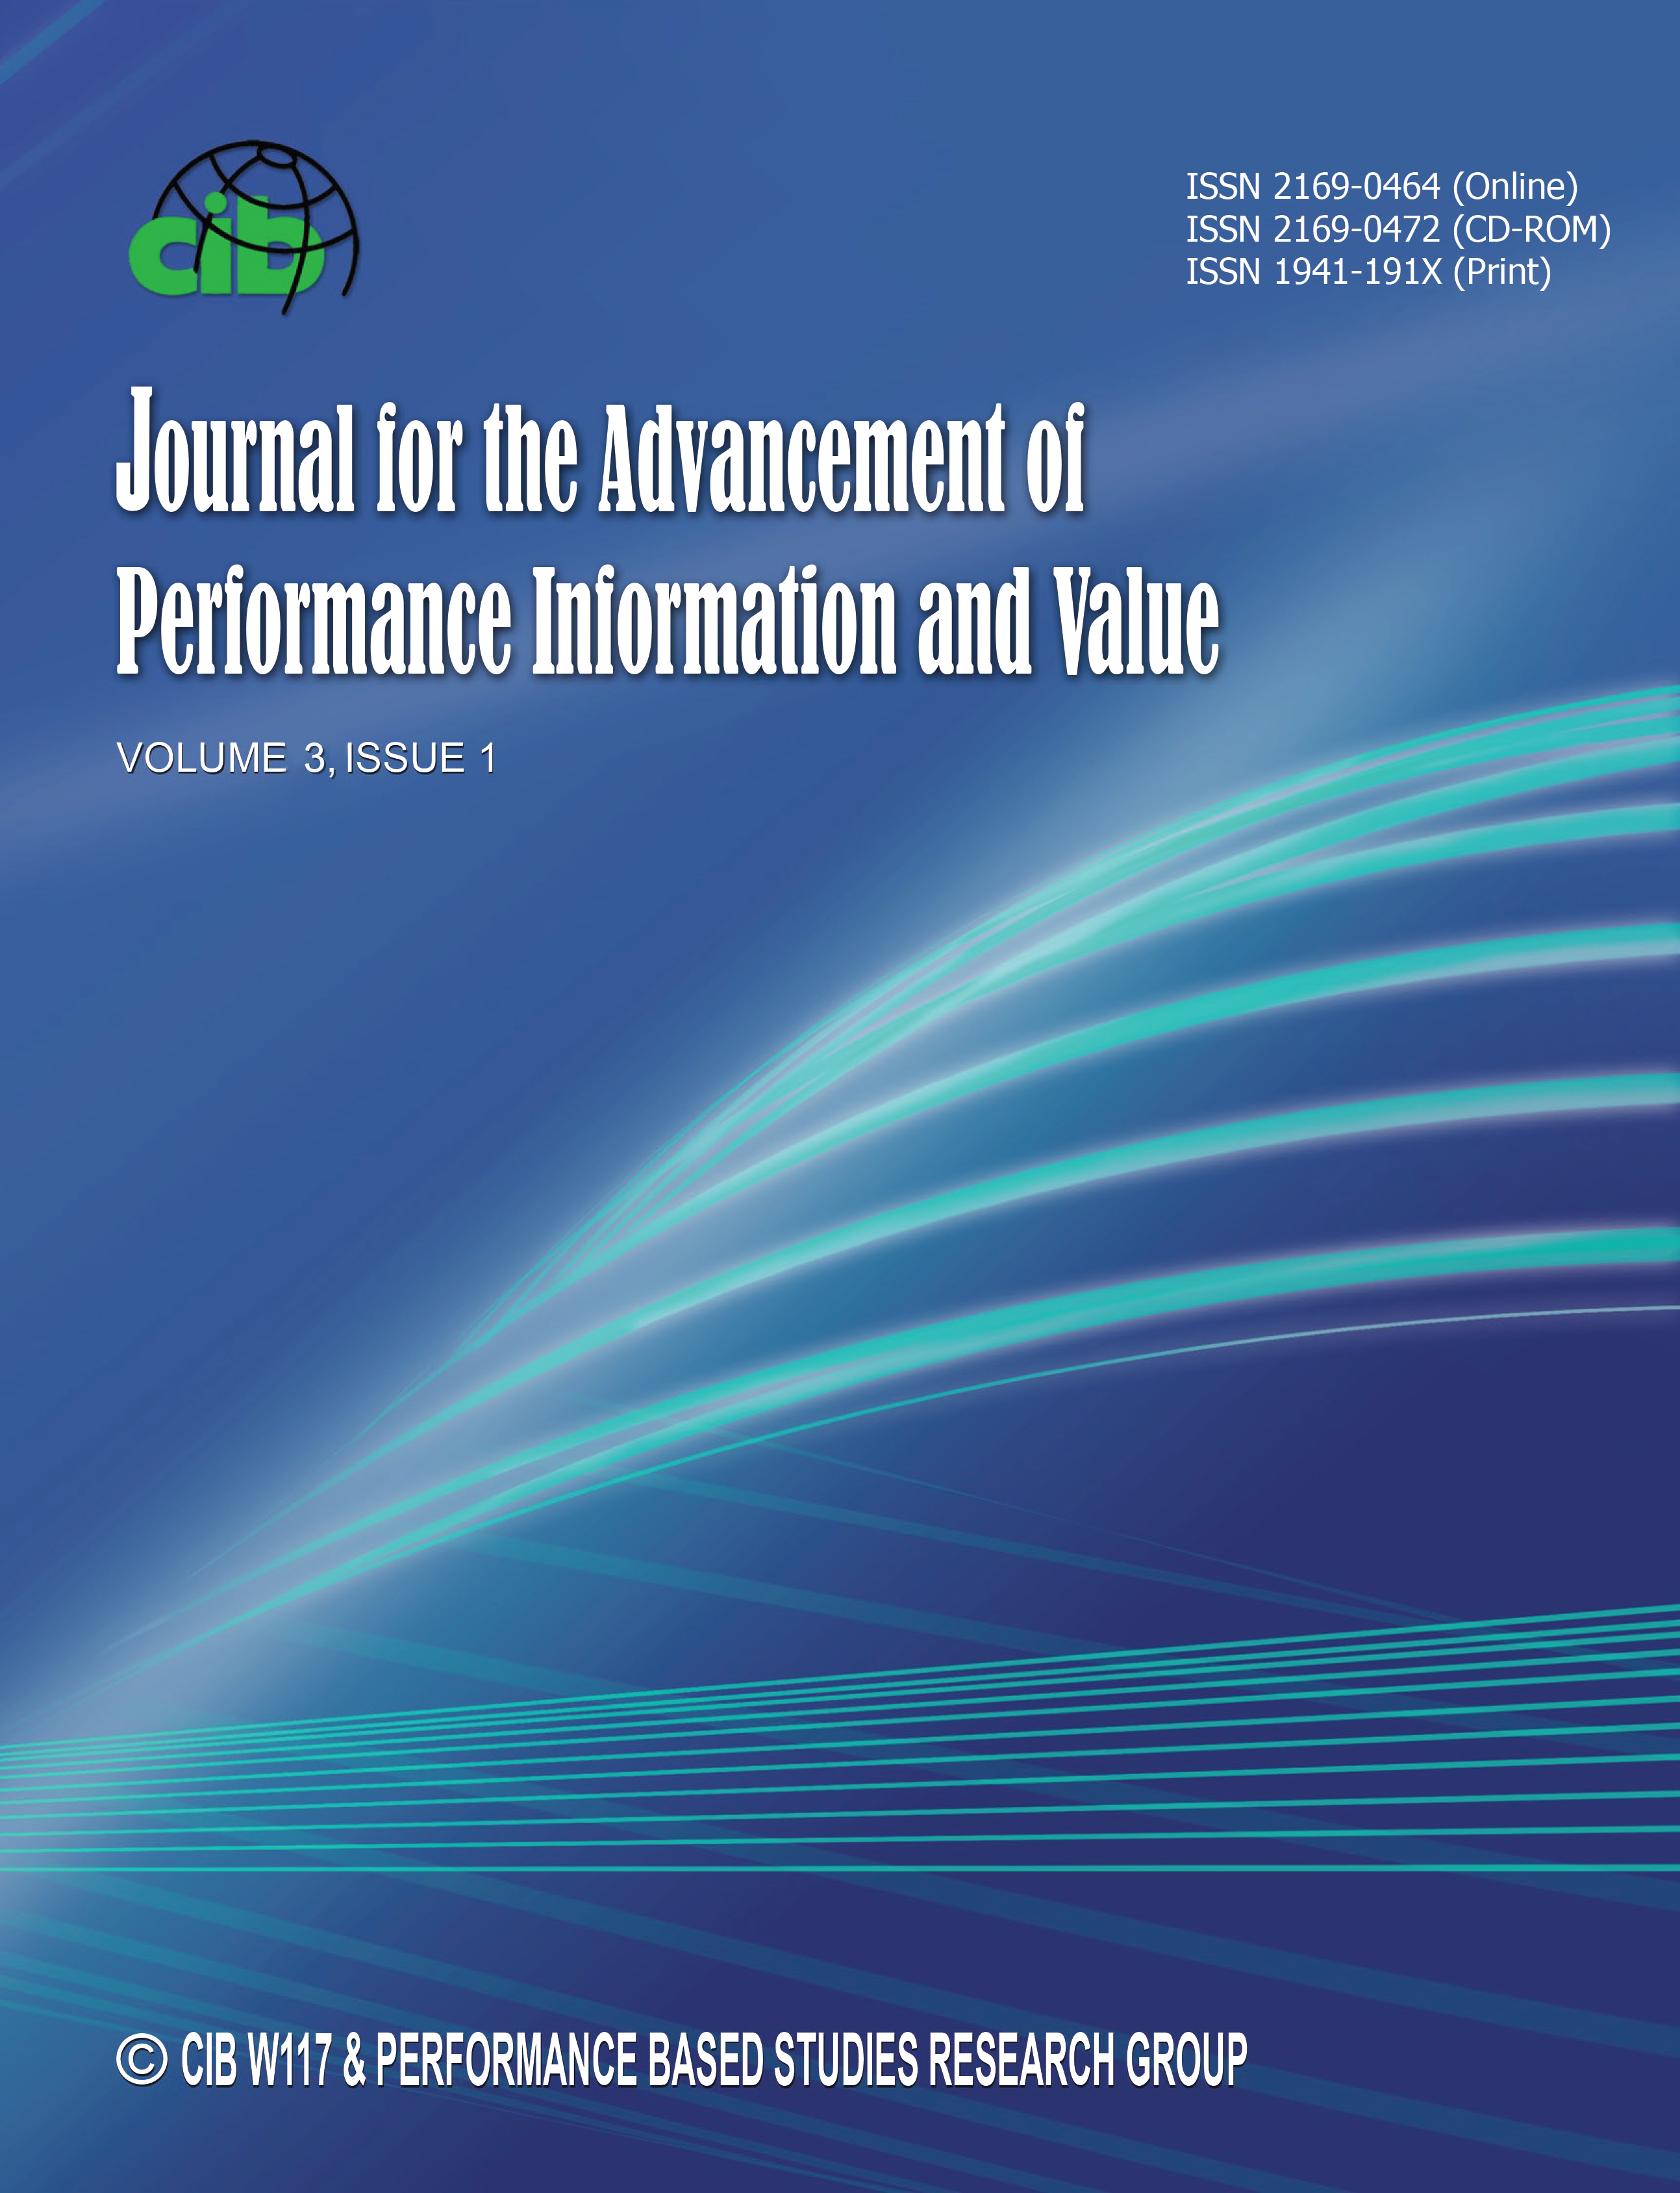 					View Vol. 3 No. 1 (2011): Journal for the Advancement of Performance Information and Value
				